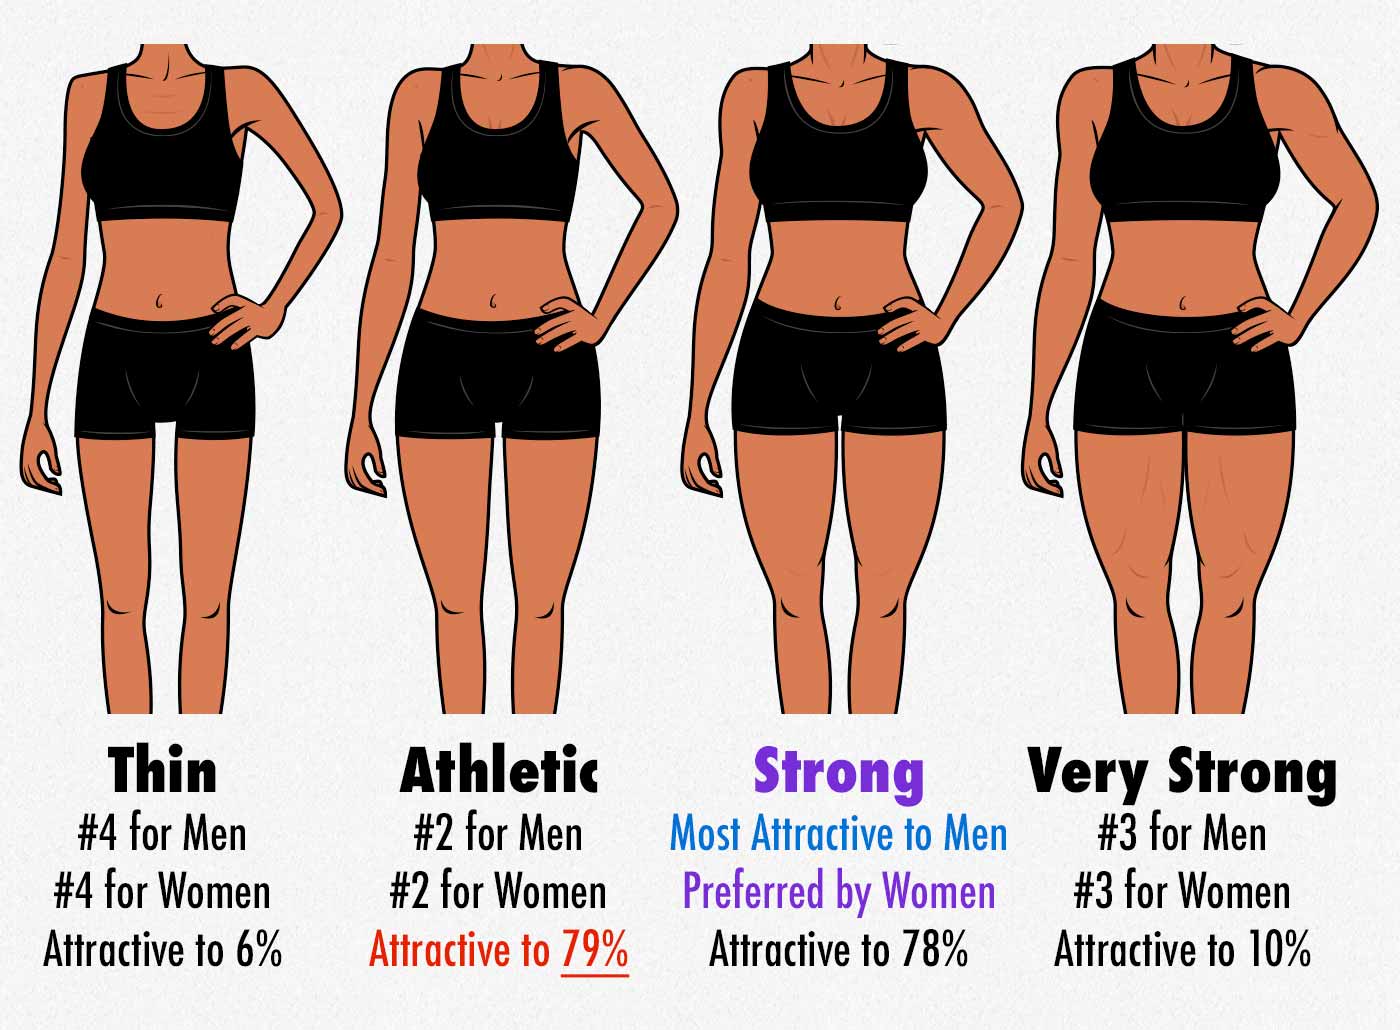 Survey results showing the amount of muscle that men prefer on a woman's body.